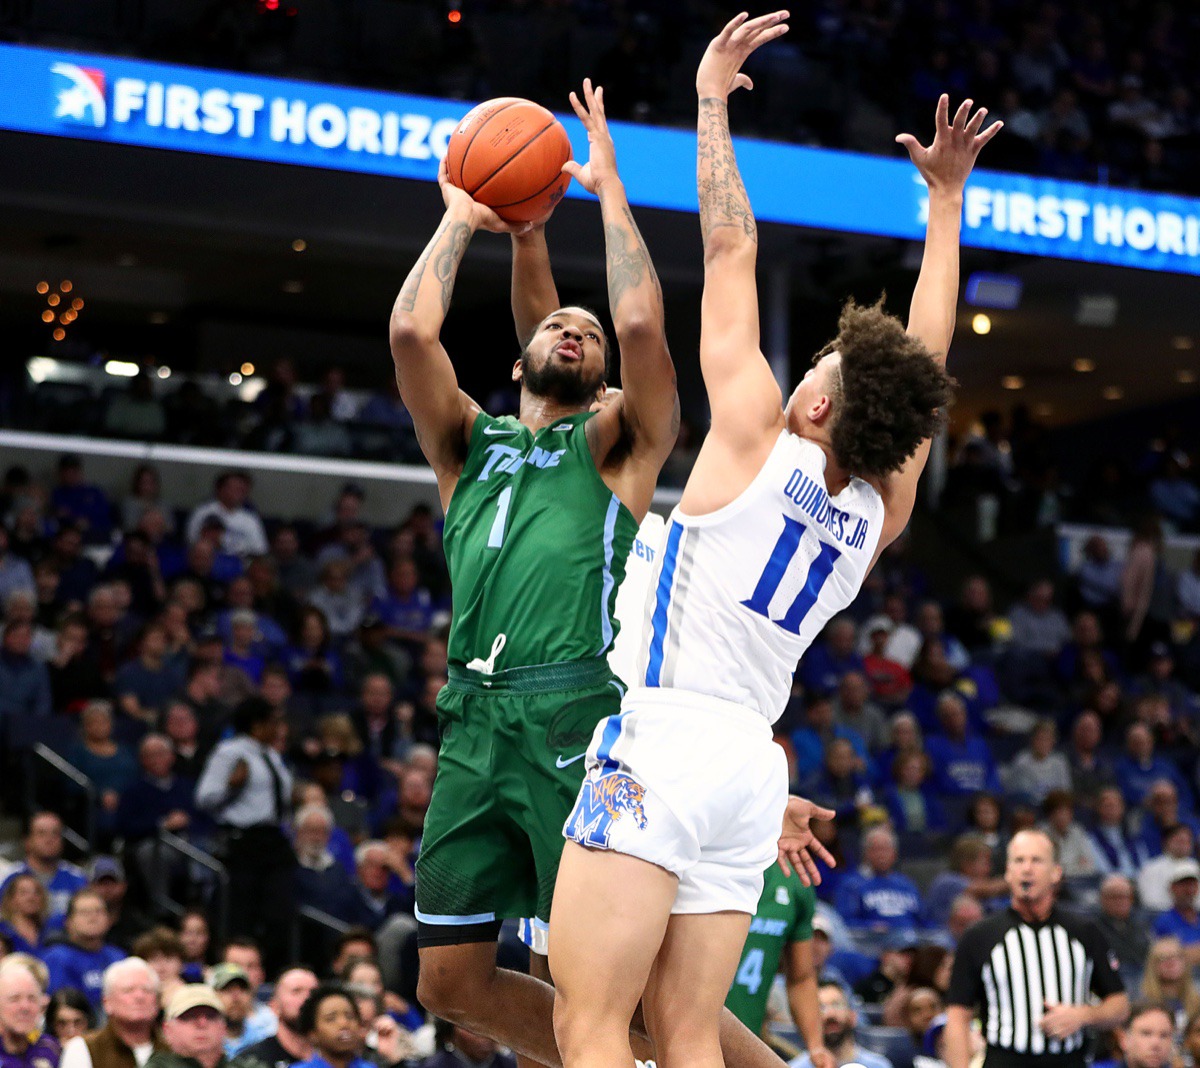 <strong>Former University of Memphis forward K.J. Lawson (1), now with Tulane University, goes to the basket during a game against at the FedExForum Dec. 30, 2019.</strong> (Patrick Lantrip/Daily Memphian)